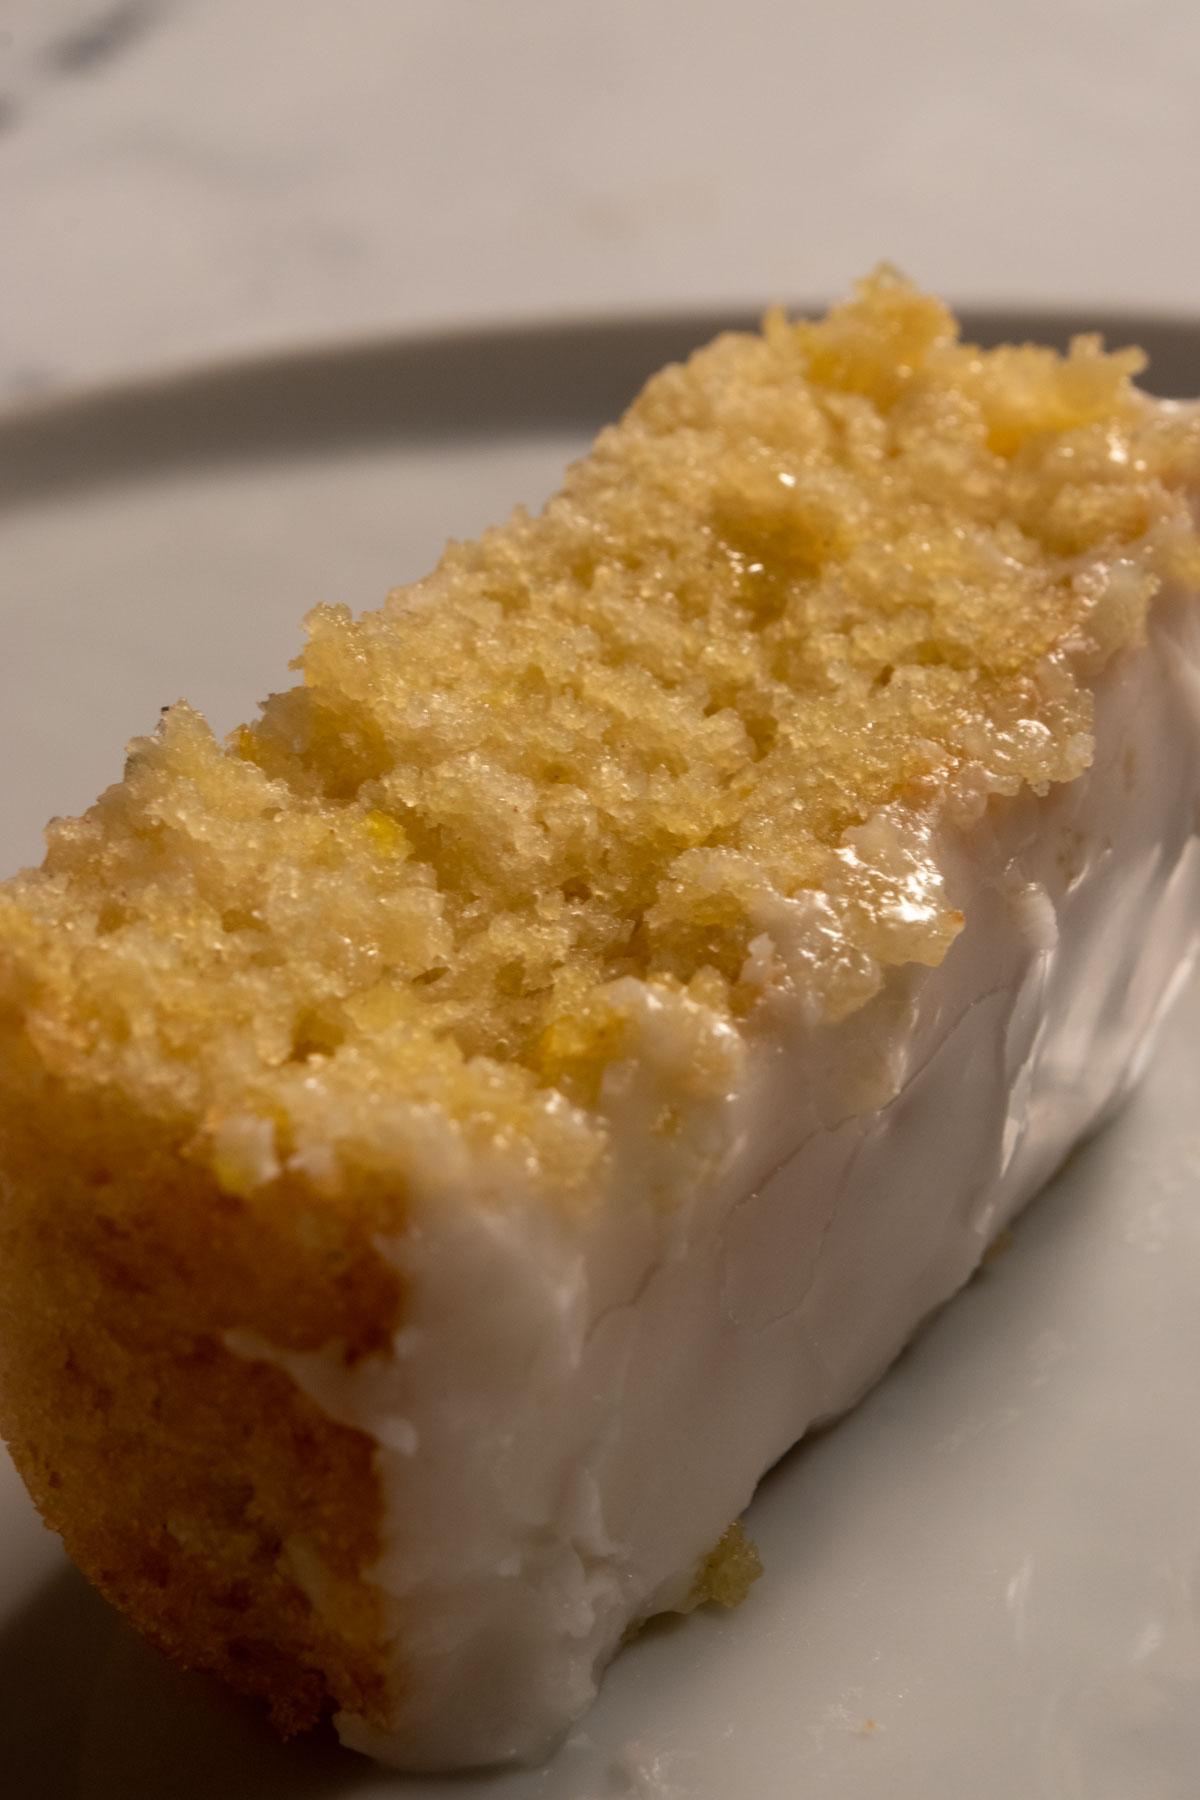 A chunky slice of lemon cake on a shiny, white plate. It's golden and moist.